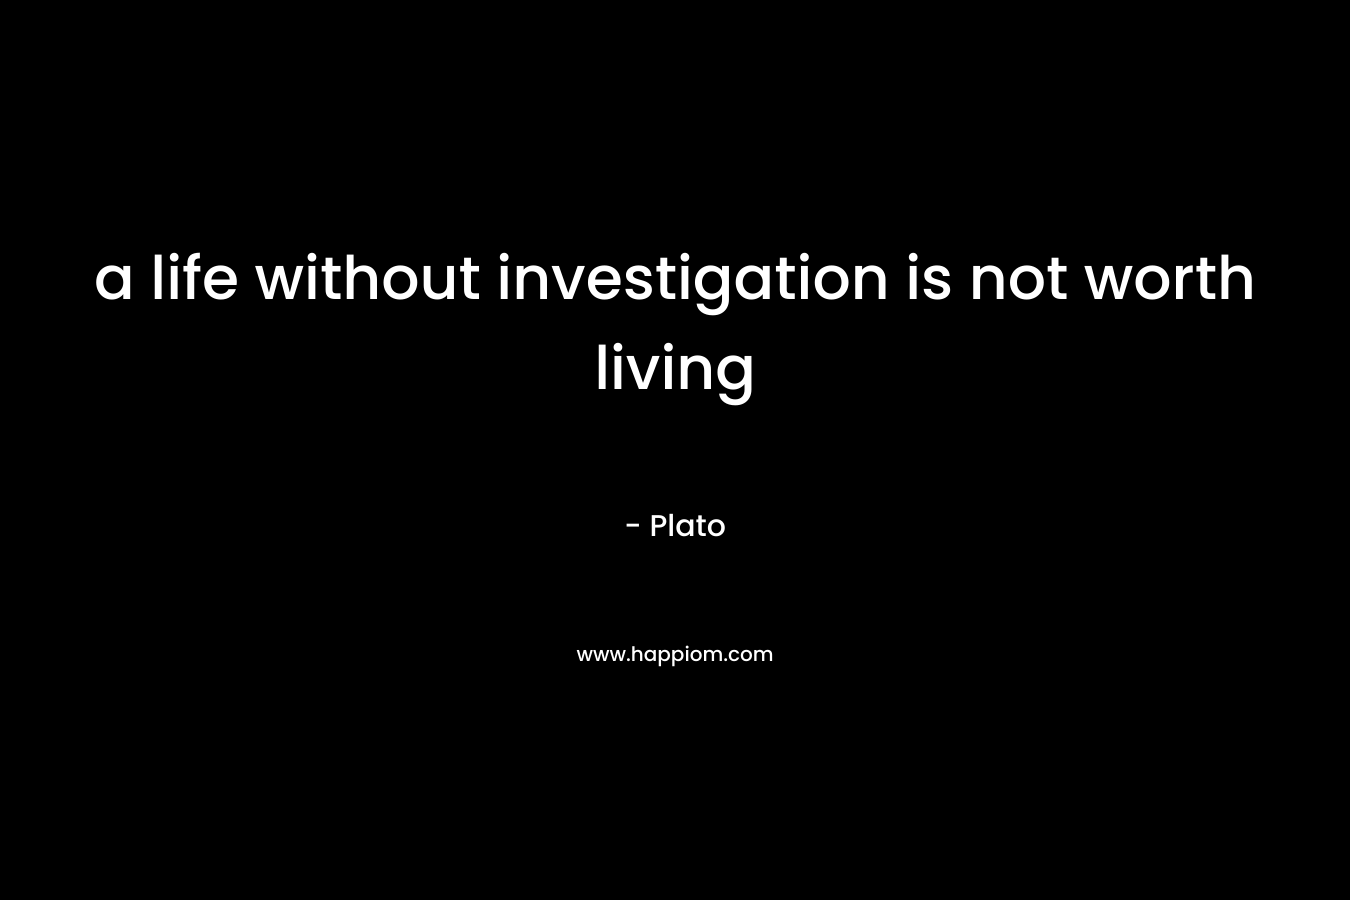 a life without investigation is not worth living